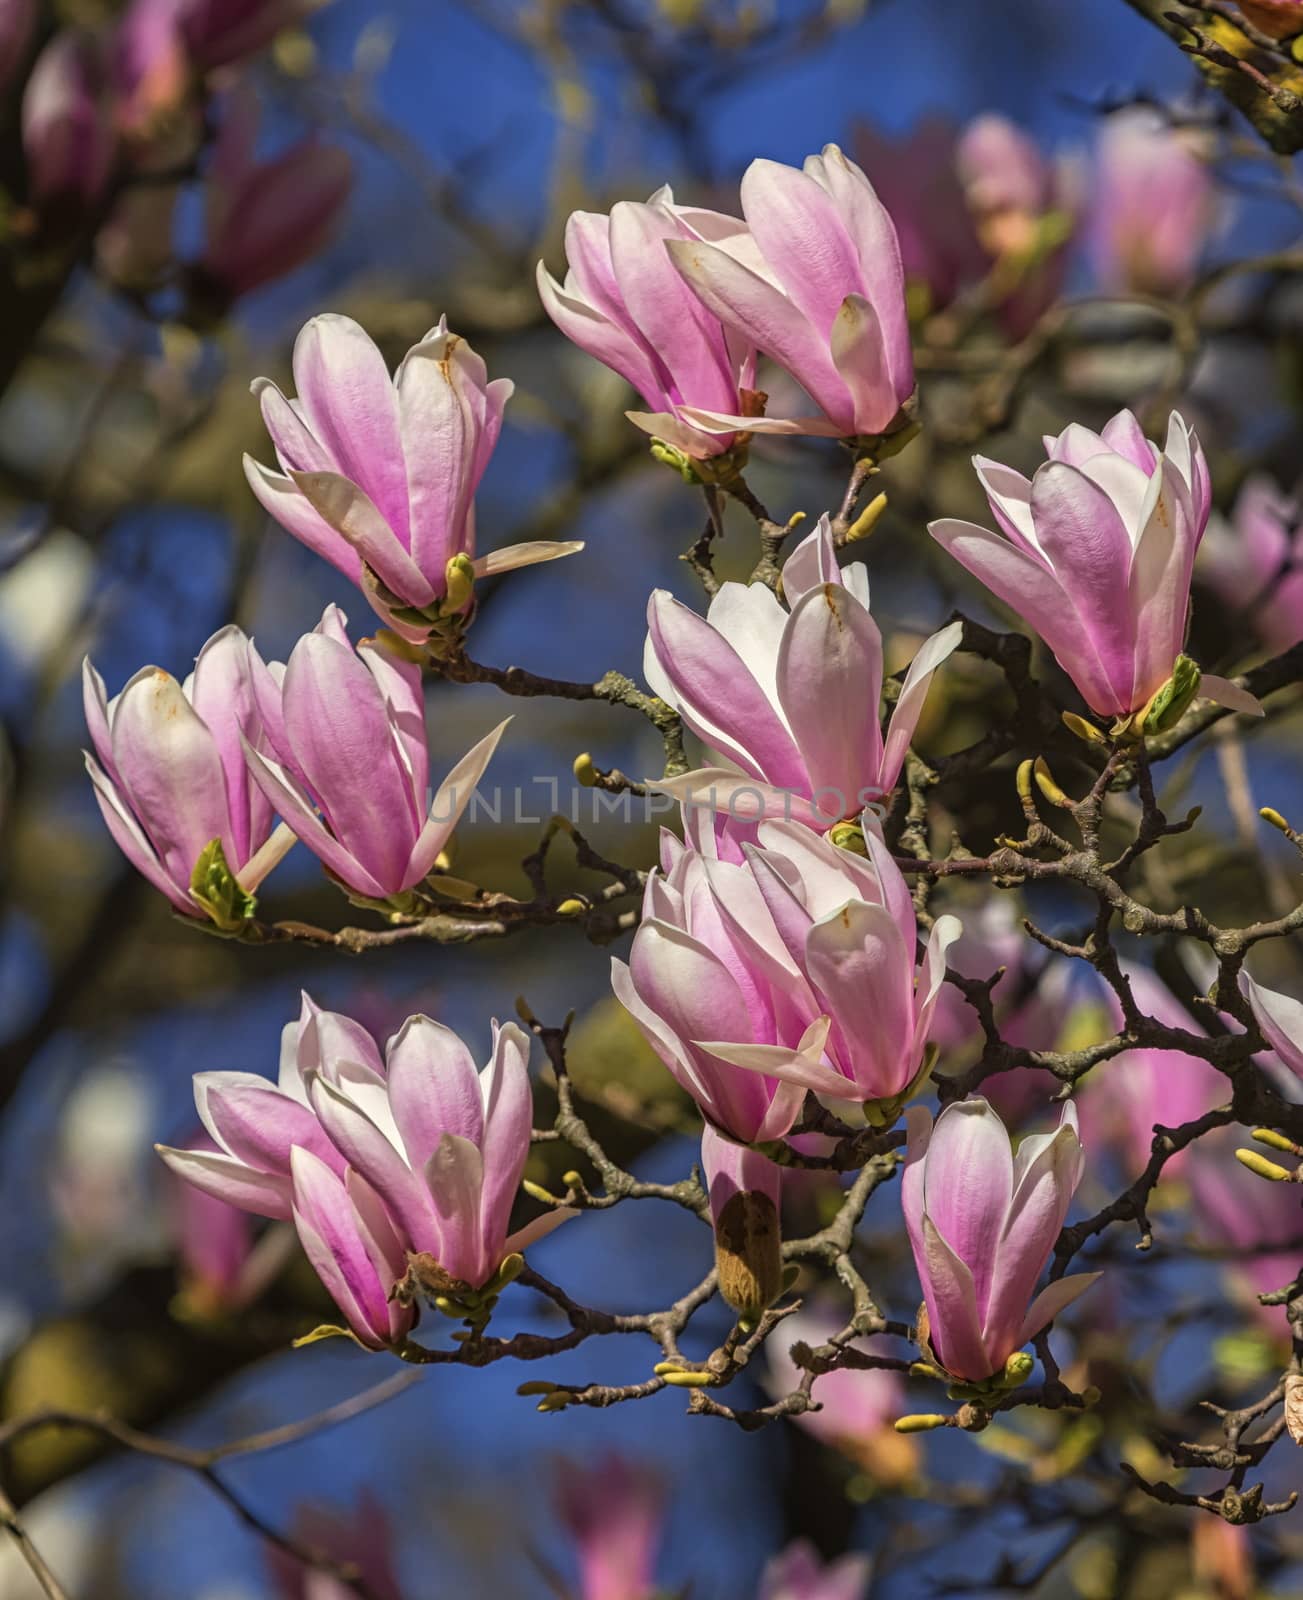 Huangshan, magnolia cylindrica, flowers by Elenaphotos21